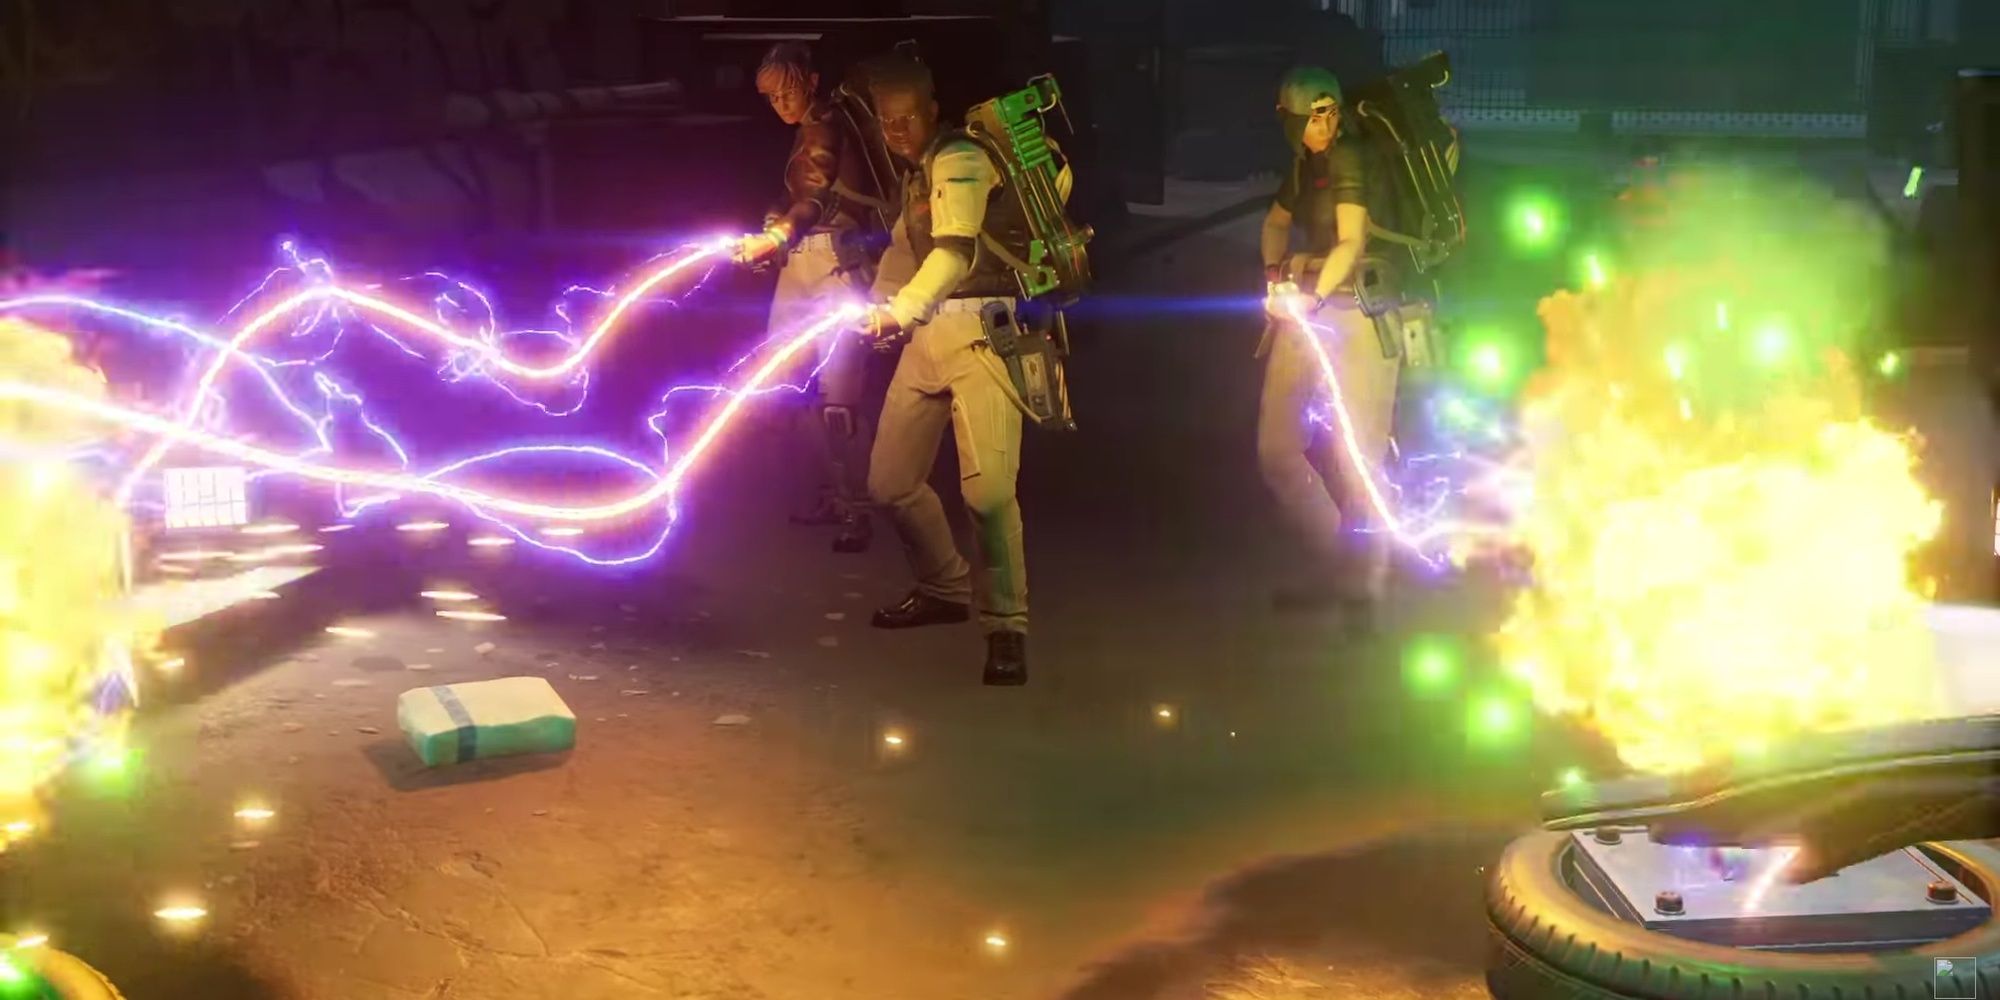 Ghostbusters: Spirits Unleashed - Trainee Ghostbusters using proton packs